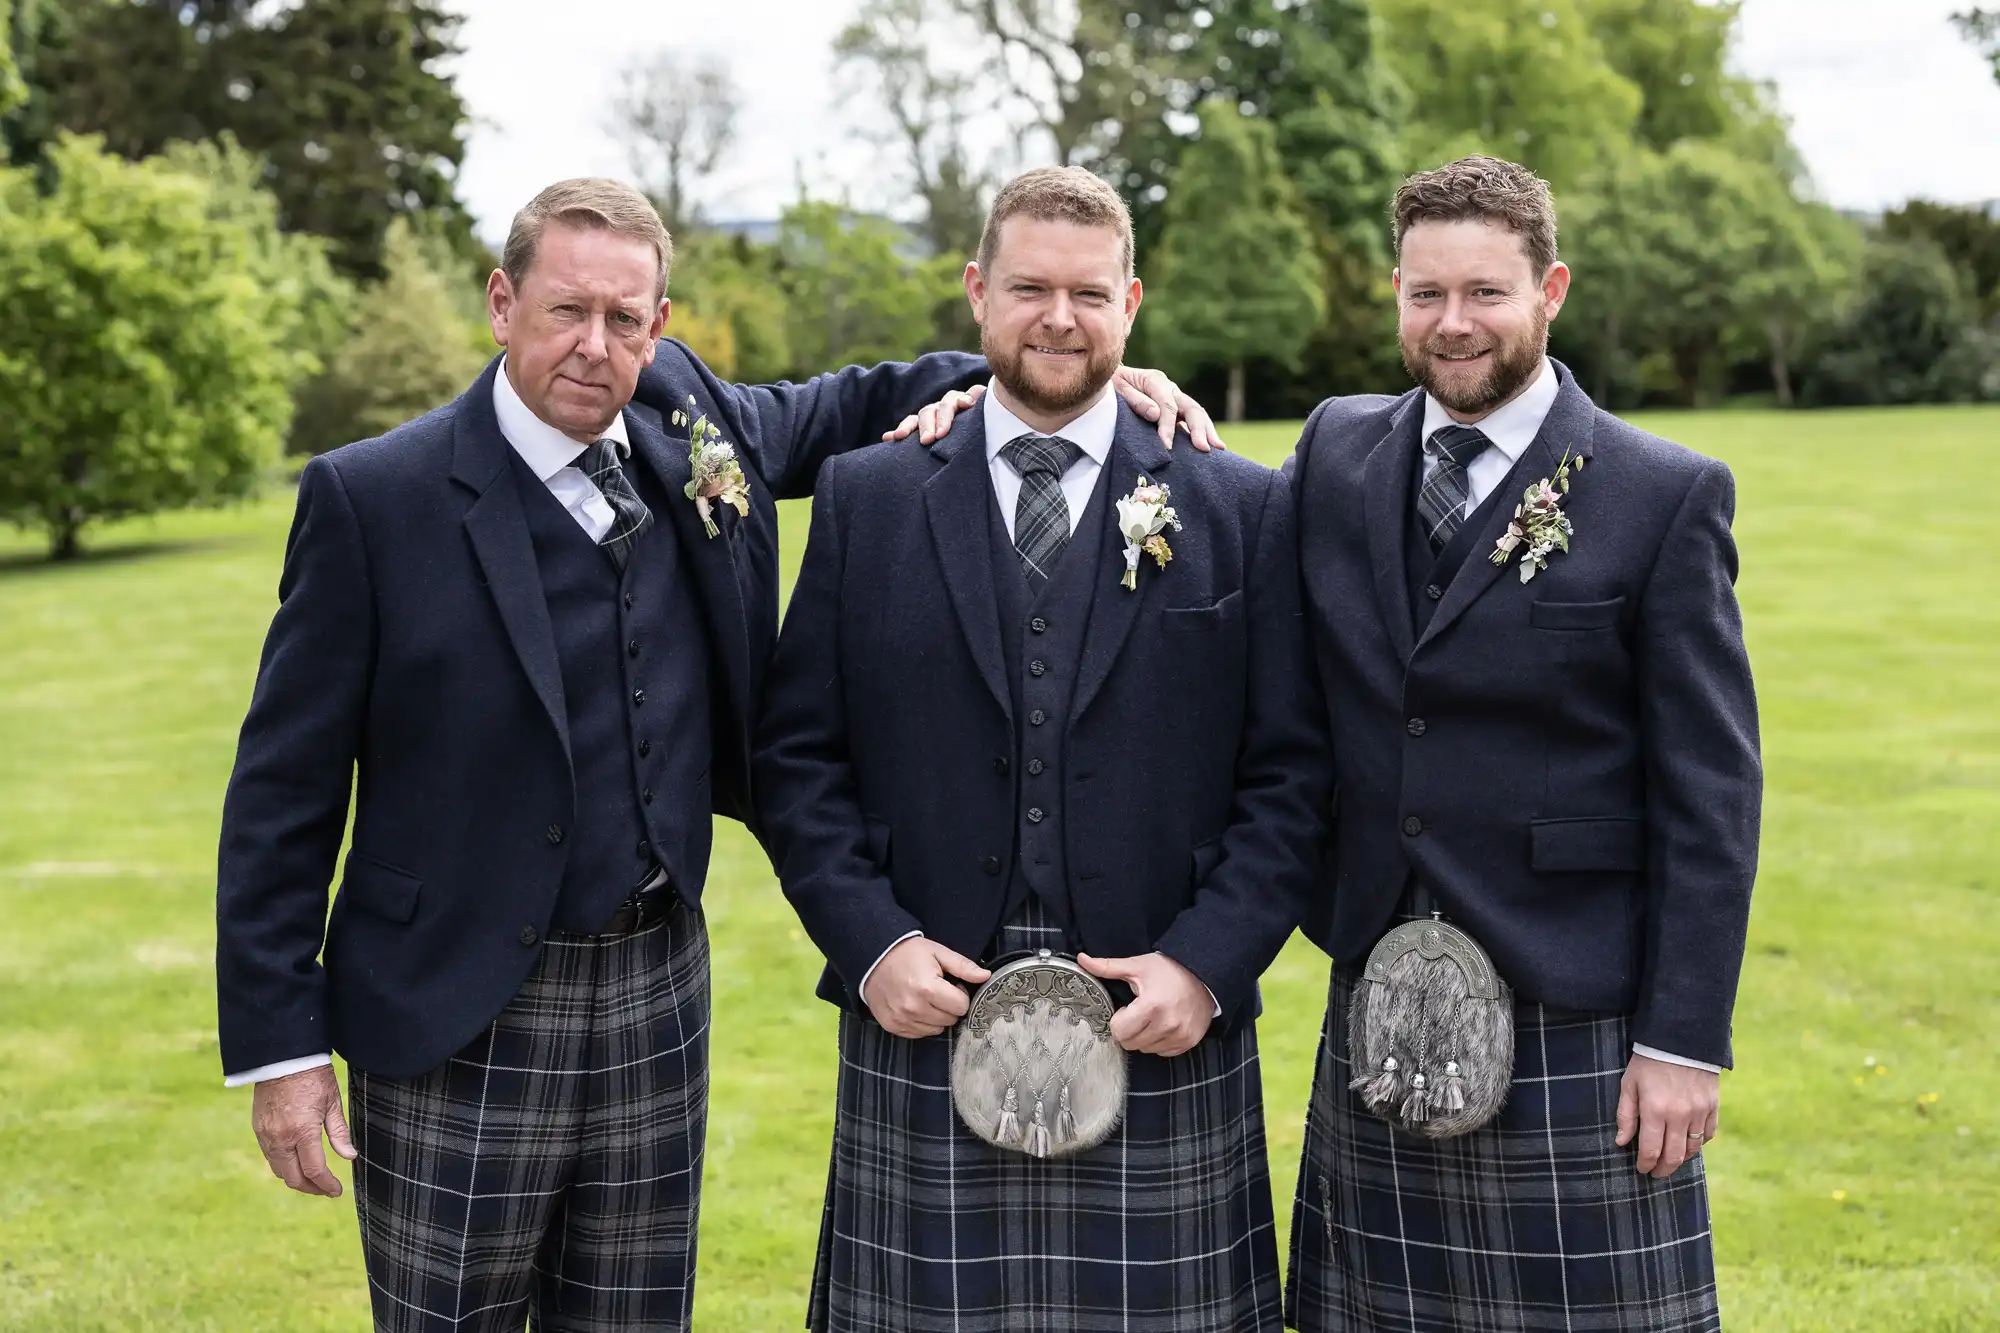 Three men in traditional Scottish kilts and jackets with floral boutonnieres, standing together and smiling in a garden.